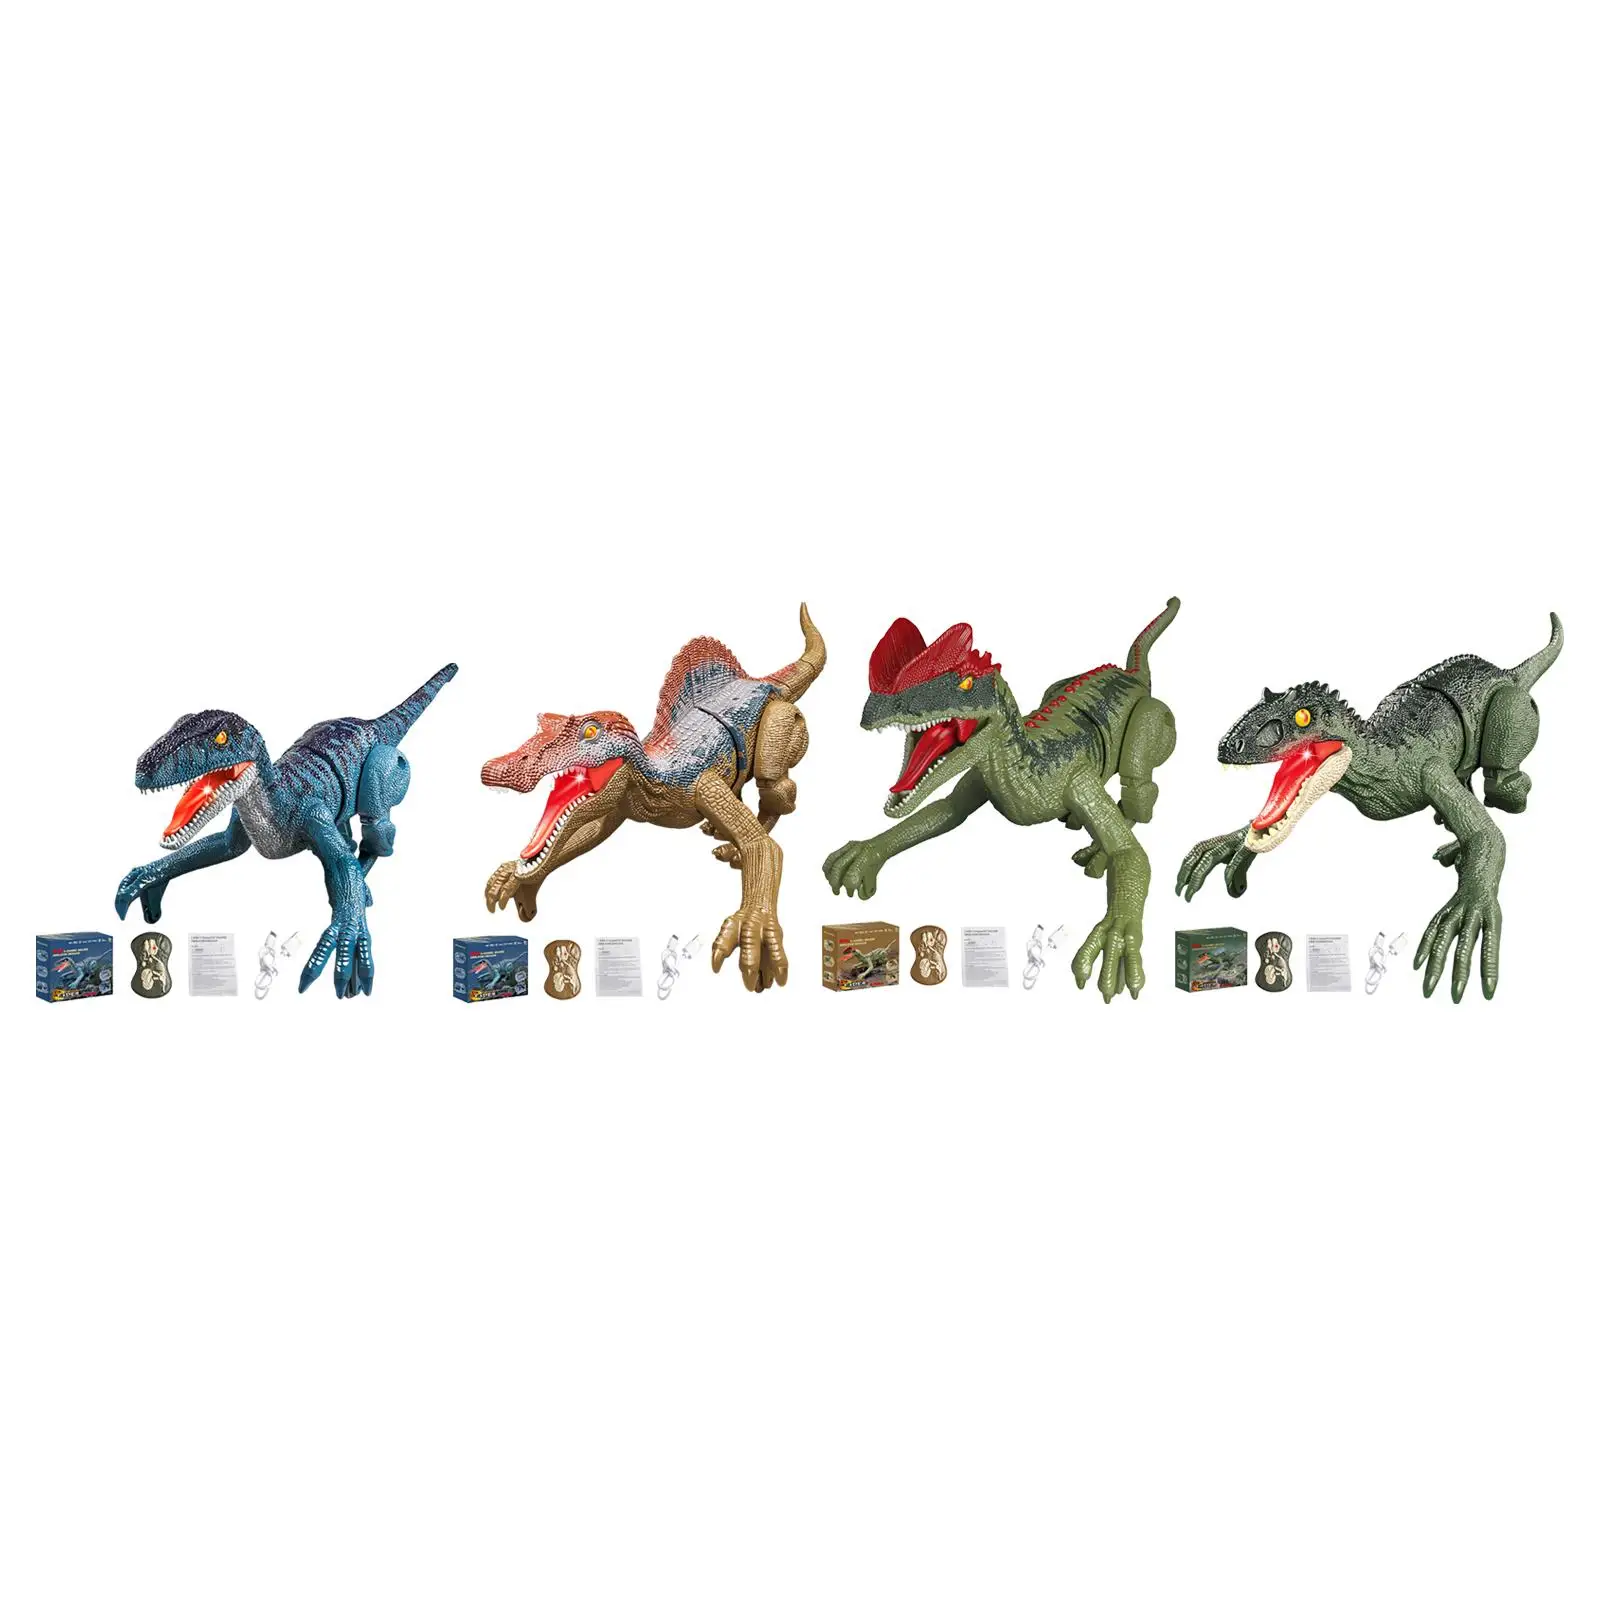 Robot Dinosaur Realistic Educational Toys Dinosaur Toy Remote Controlled Dinosaur for Girls Boys Children Kids Holiday Gifts